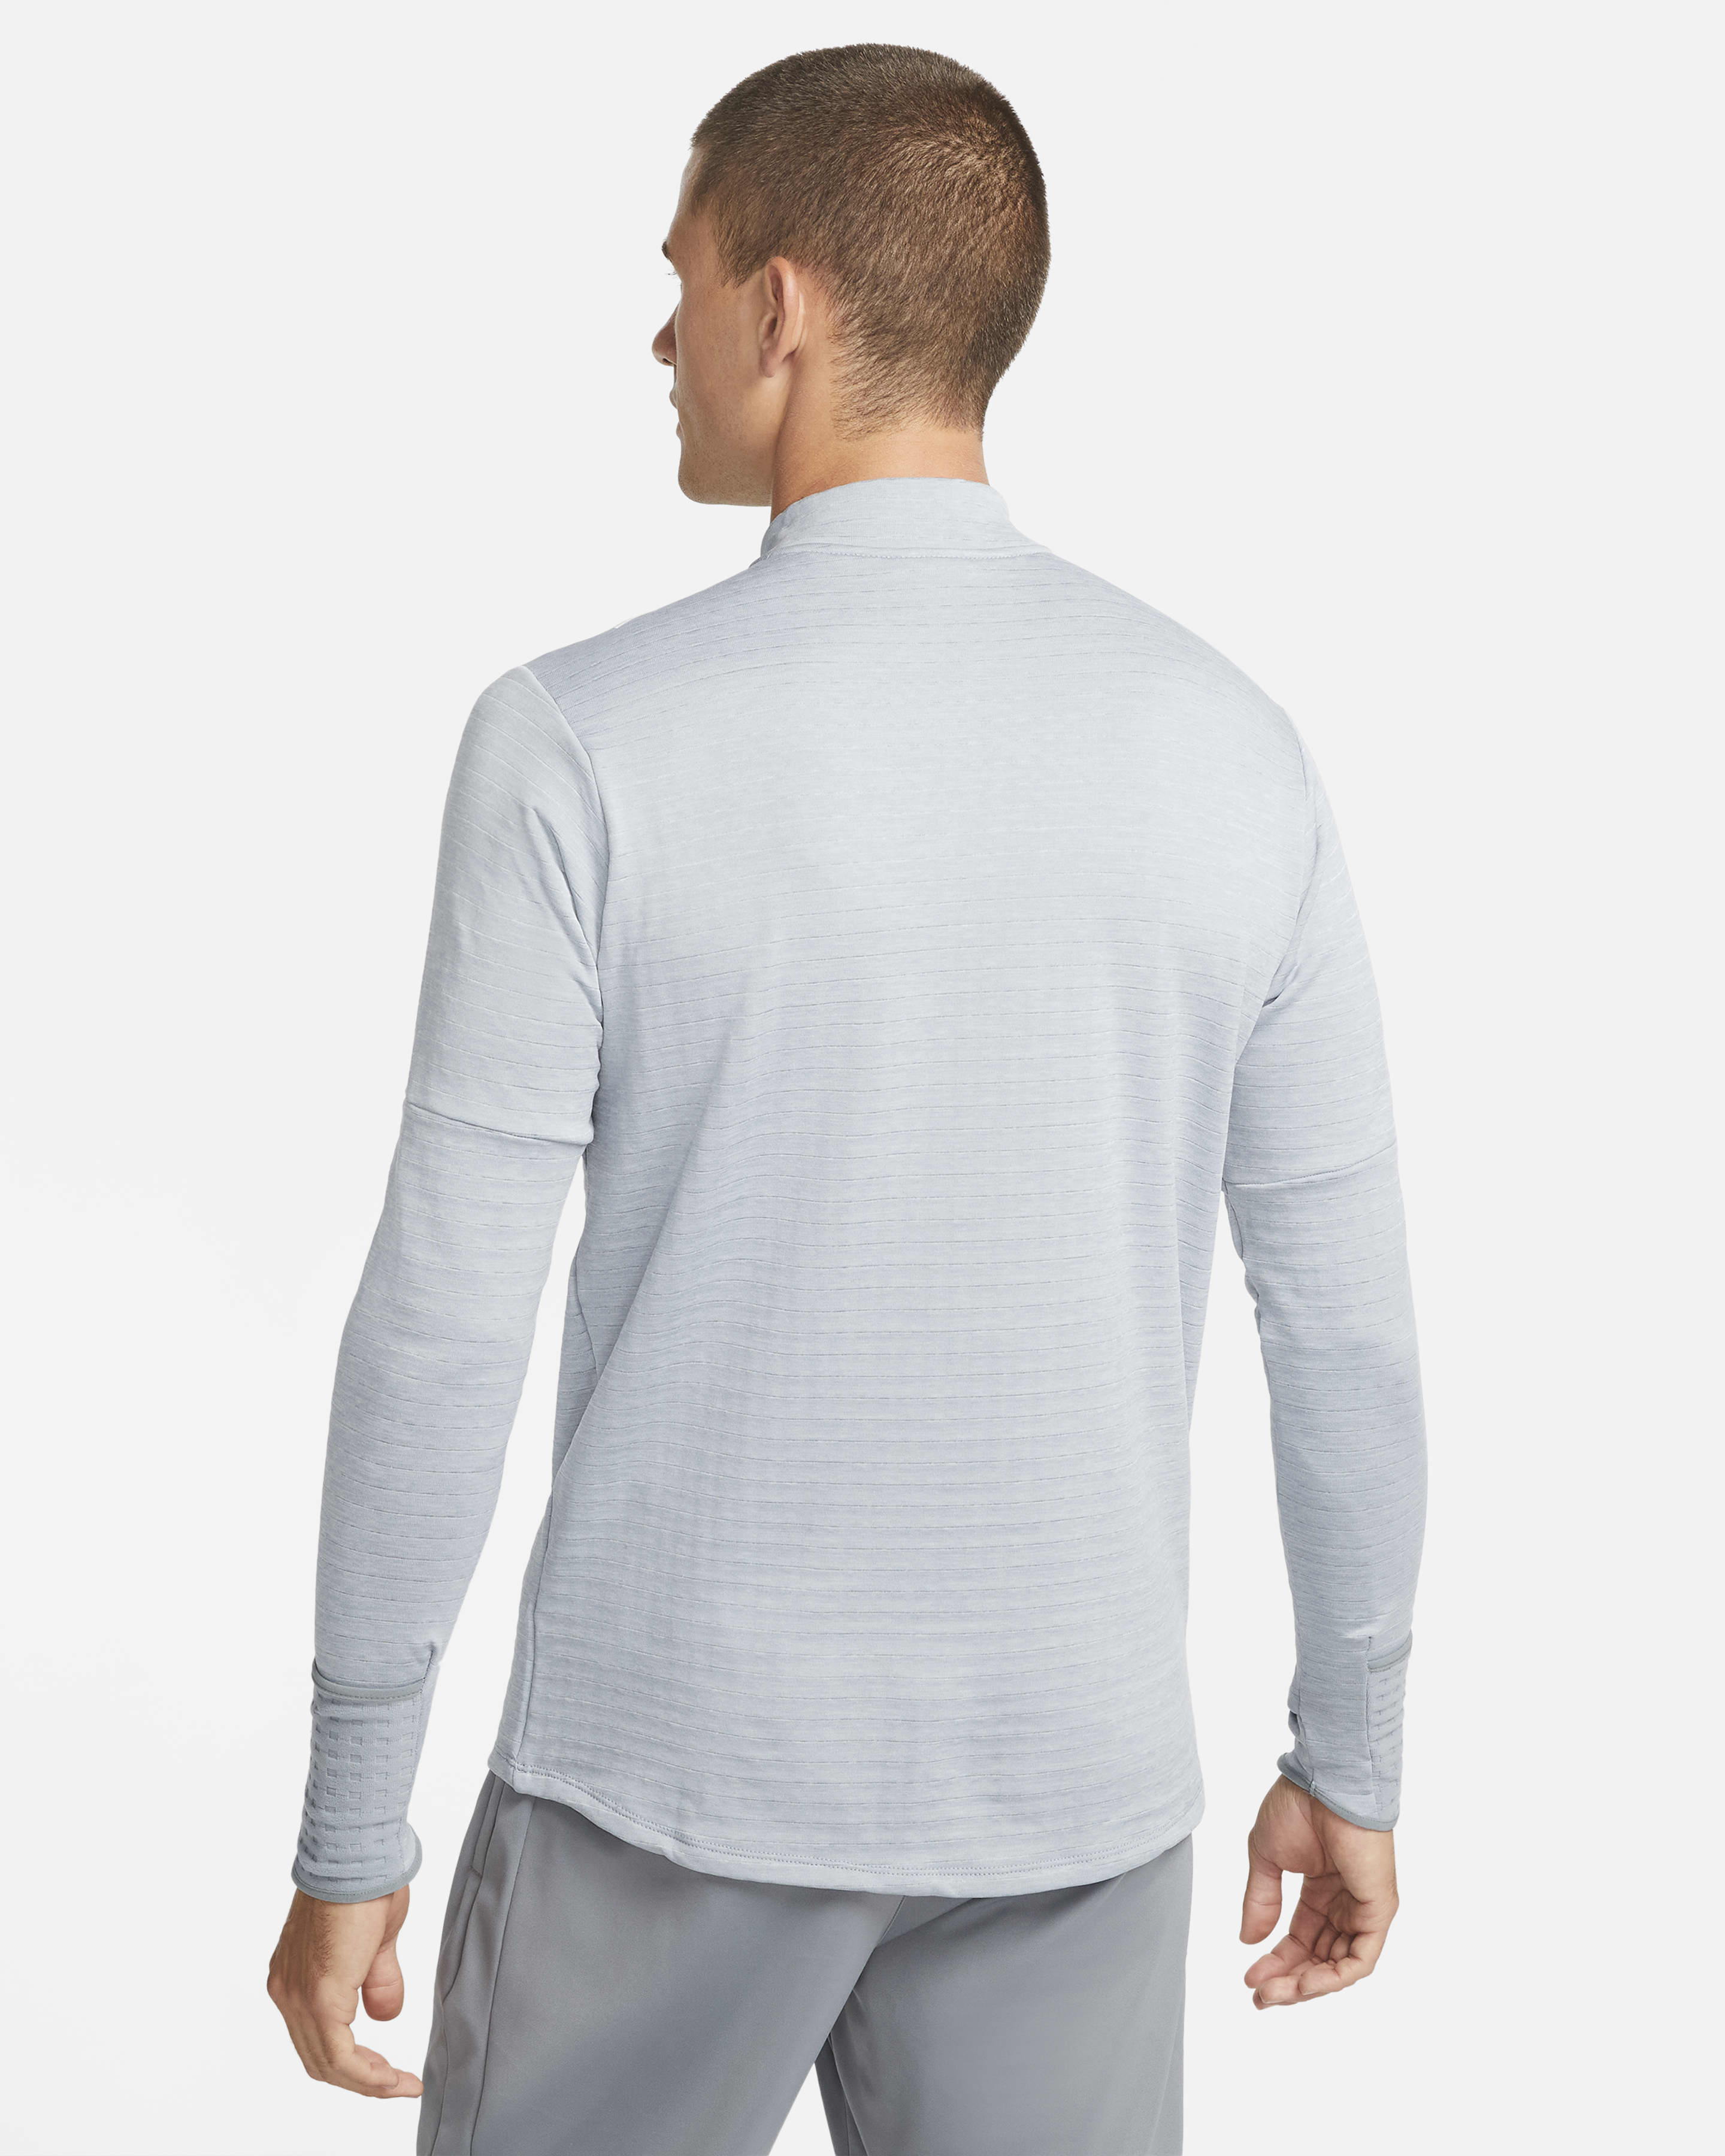 13 Best Thermal Shirts For Men 2023 Thermal Waffle Knit Tees | lupon.gov.ph